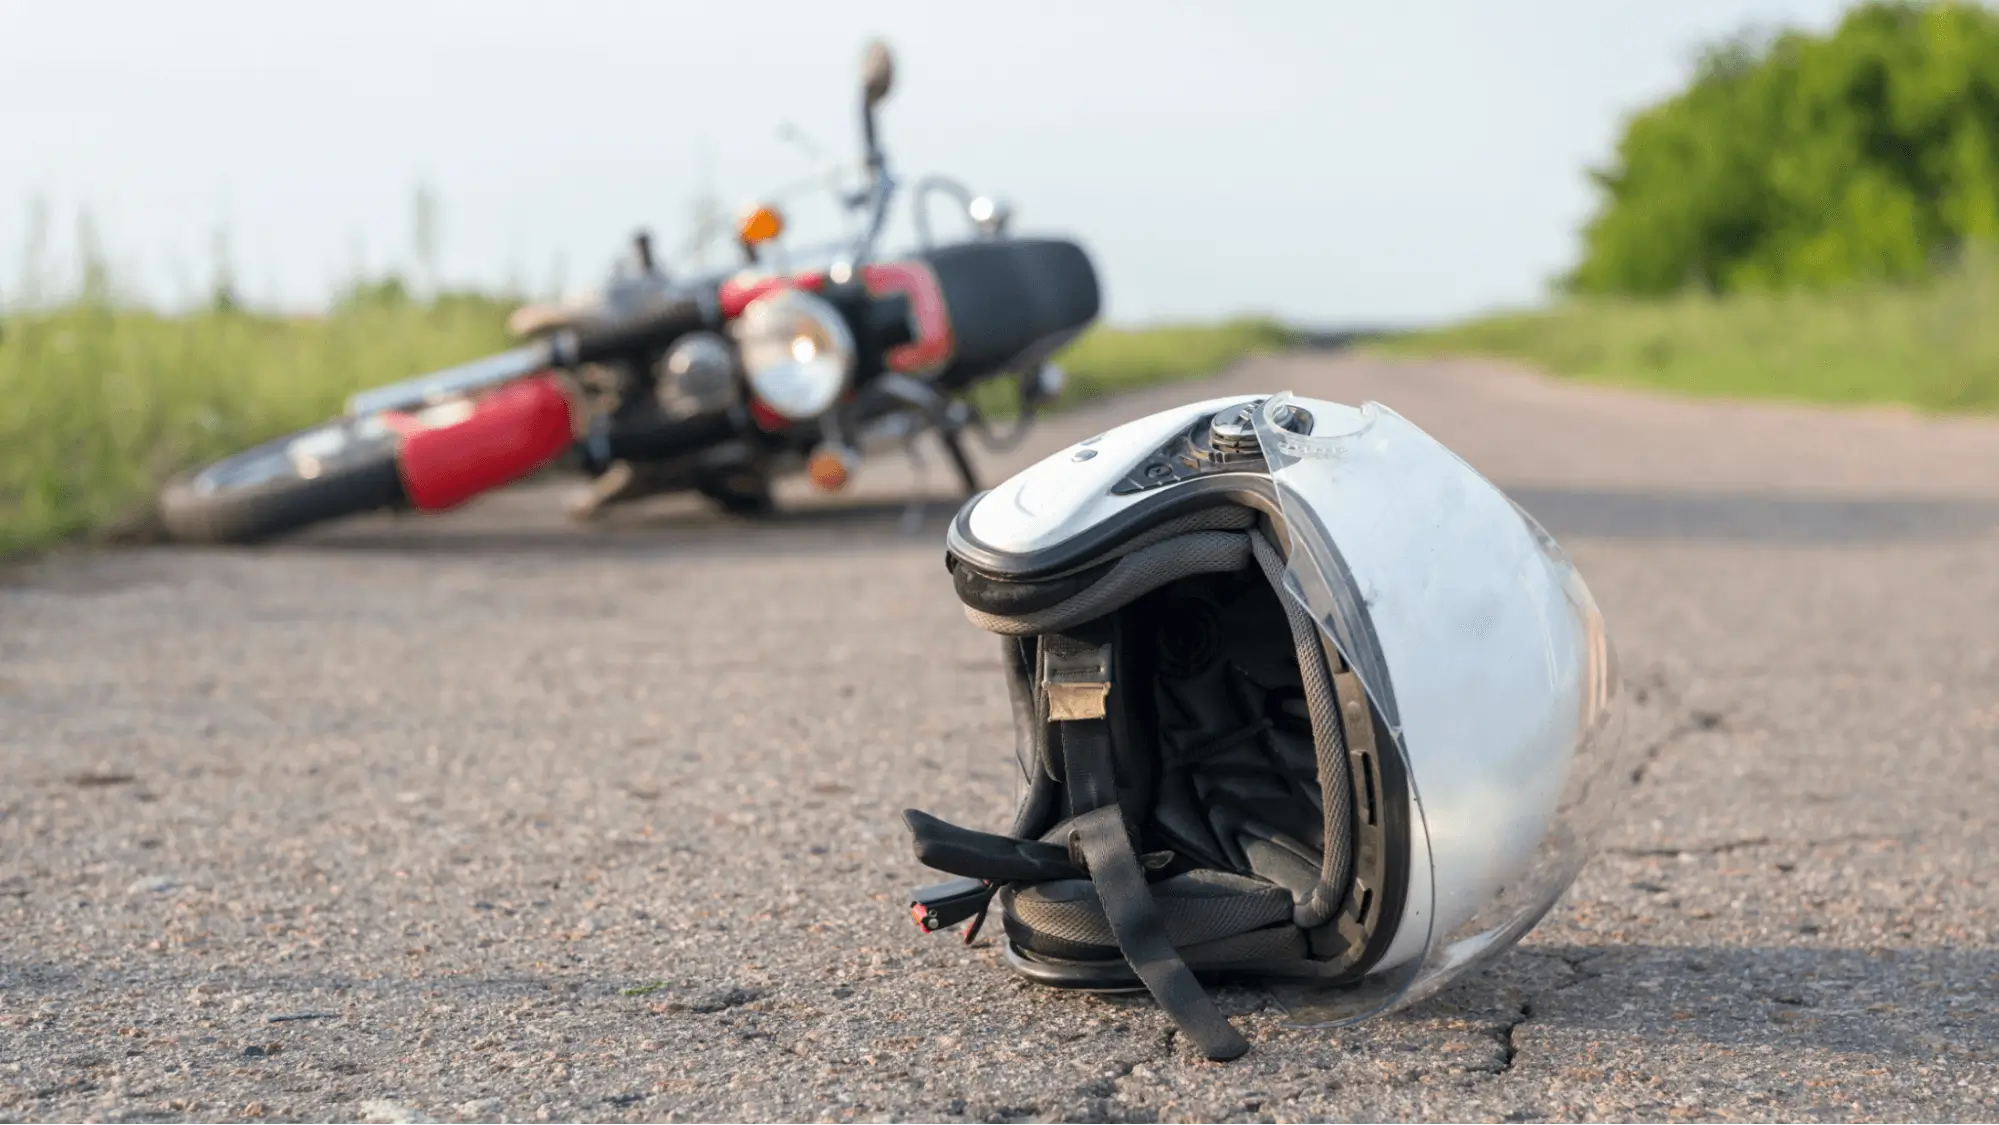 Injured in a motorcycle accident? Our Henderson personal injury attorneys are here for you.